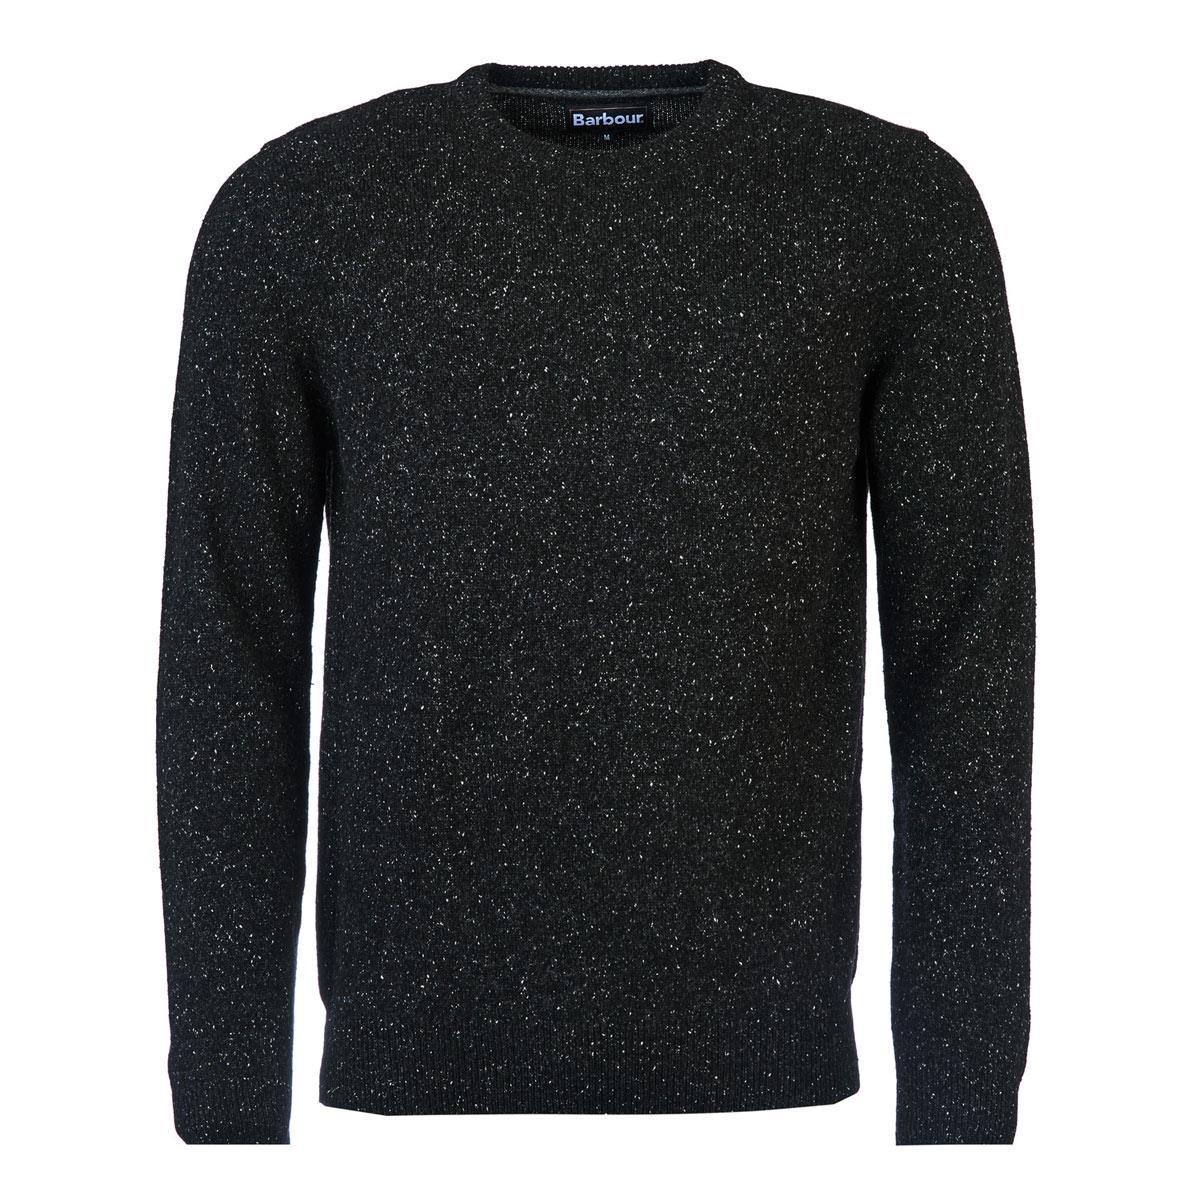 What are the features of the Barbour Tisbury Crew Neck Sweater?